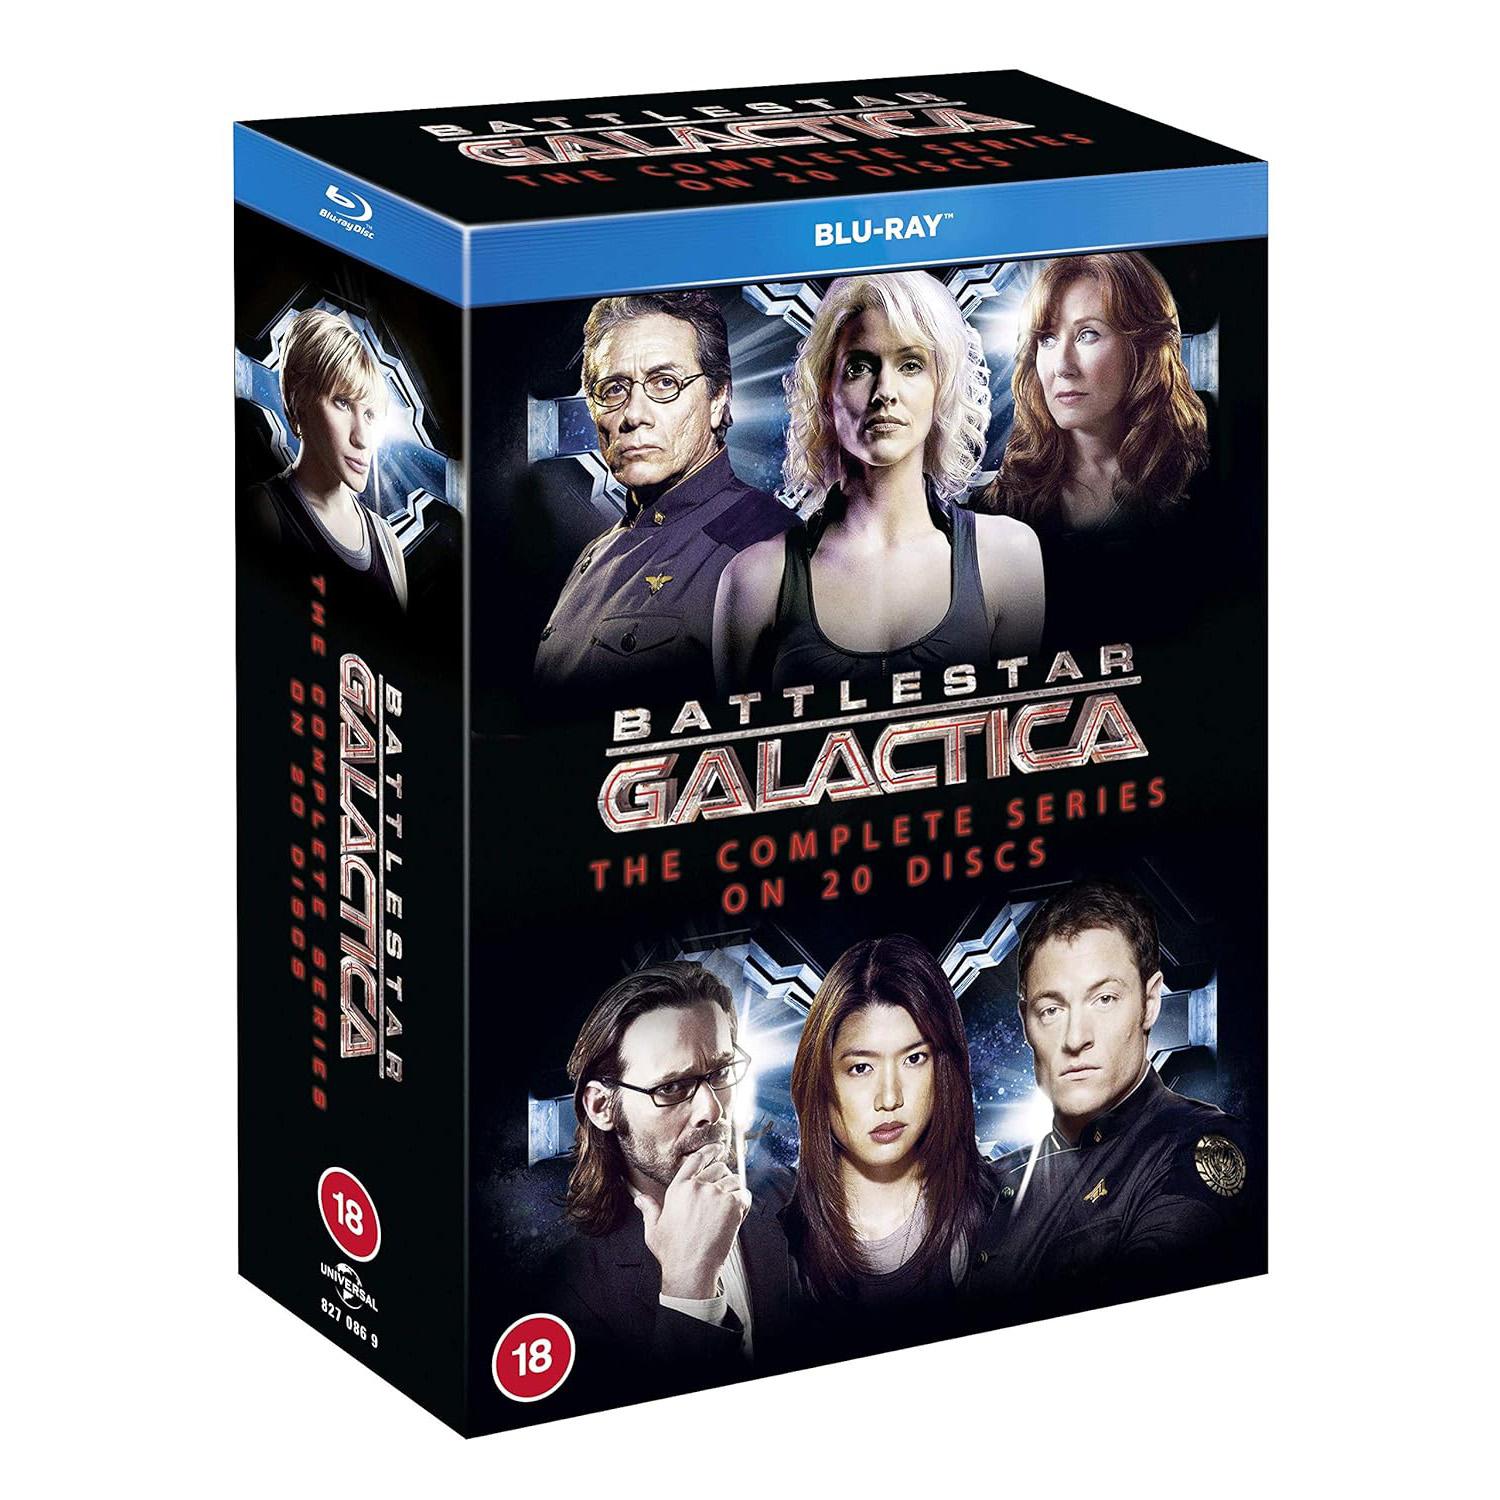 Battlestar Galactica The Complete Series Blu-ray for $42.63 Shipped